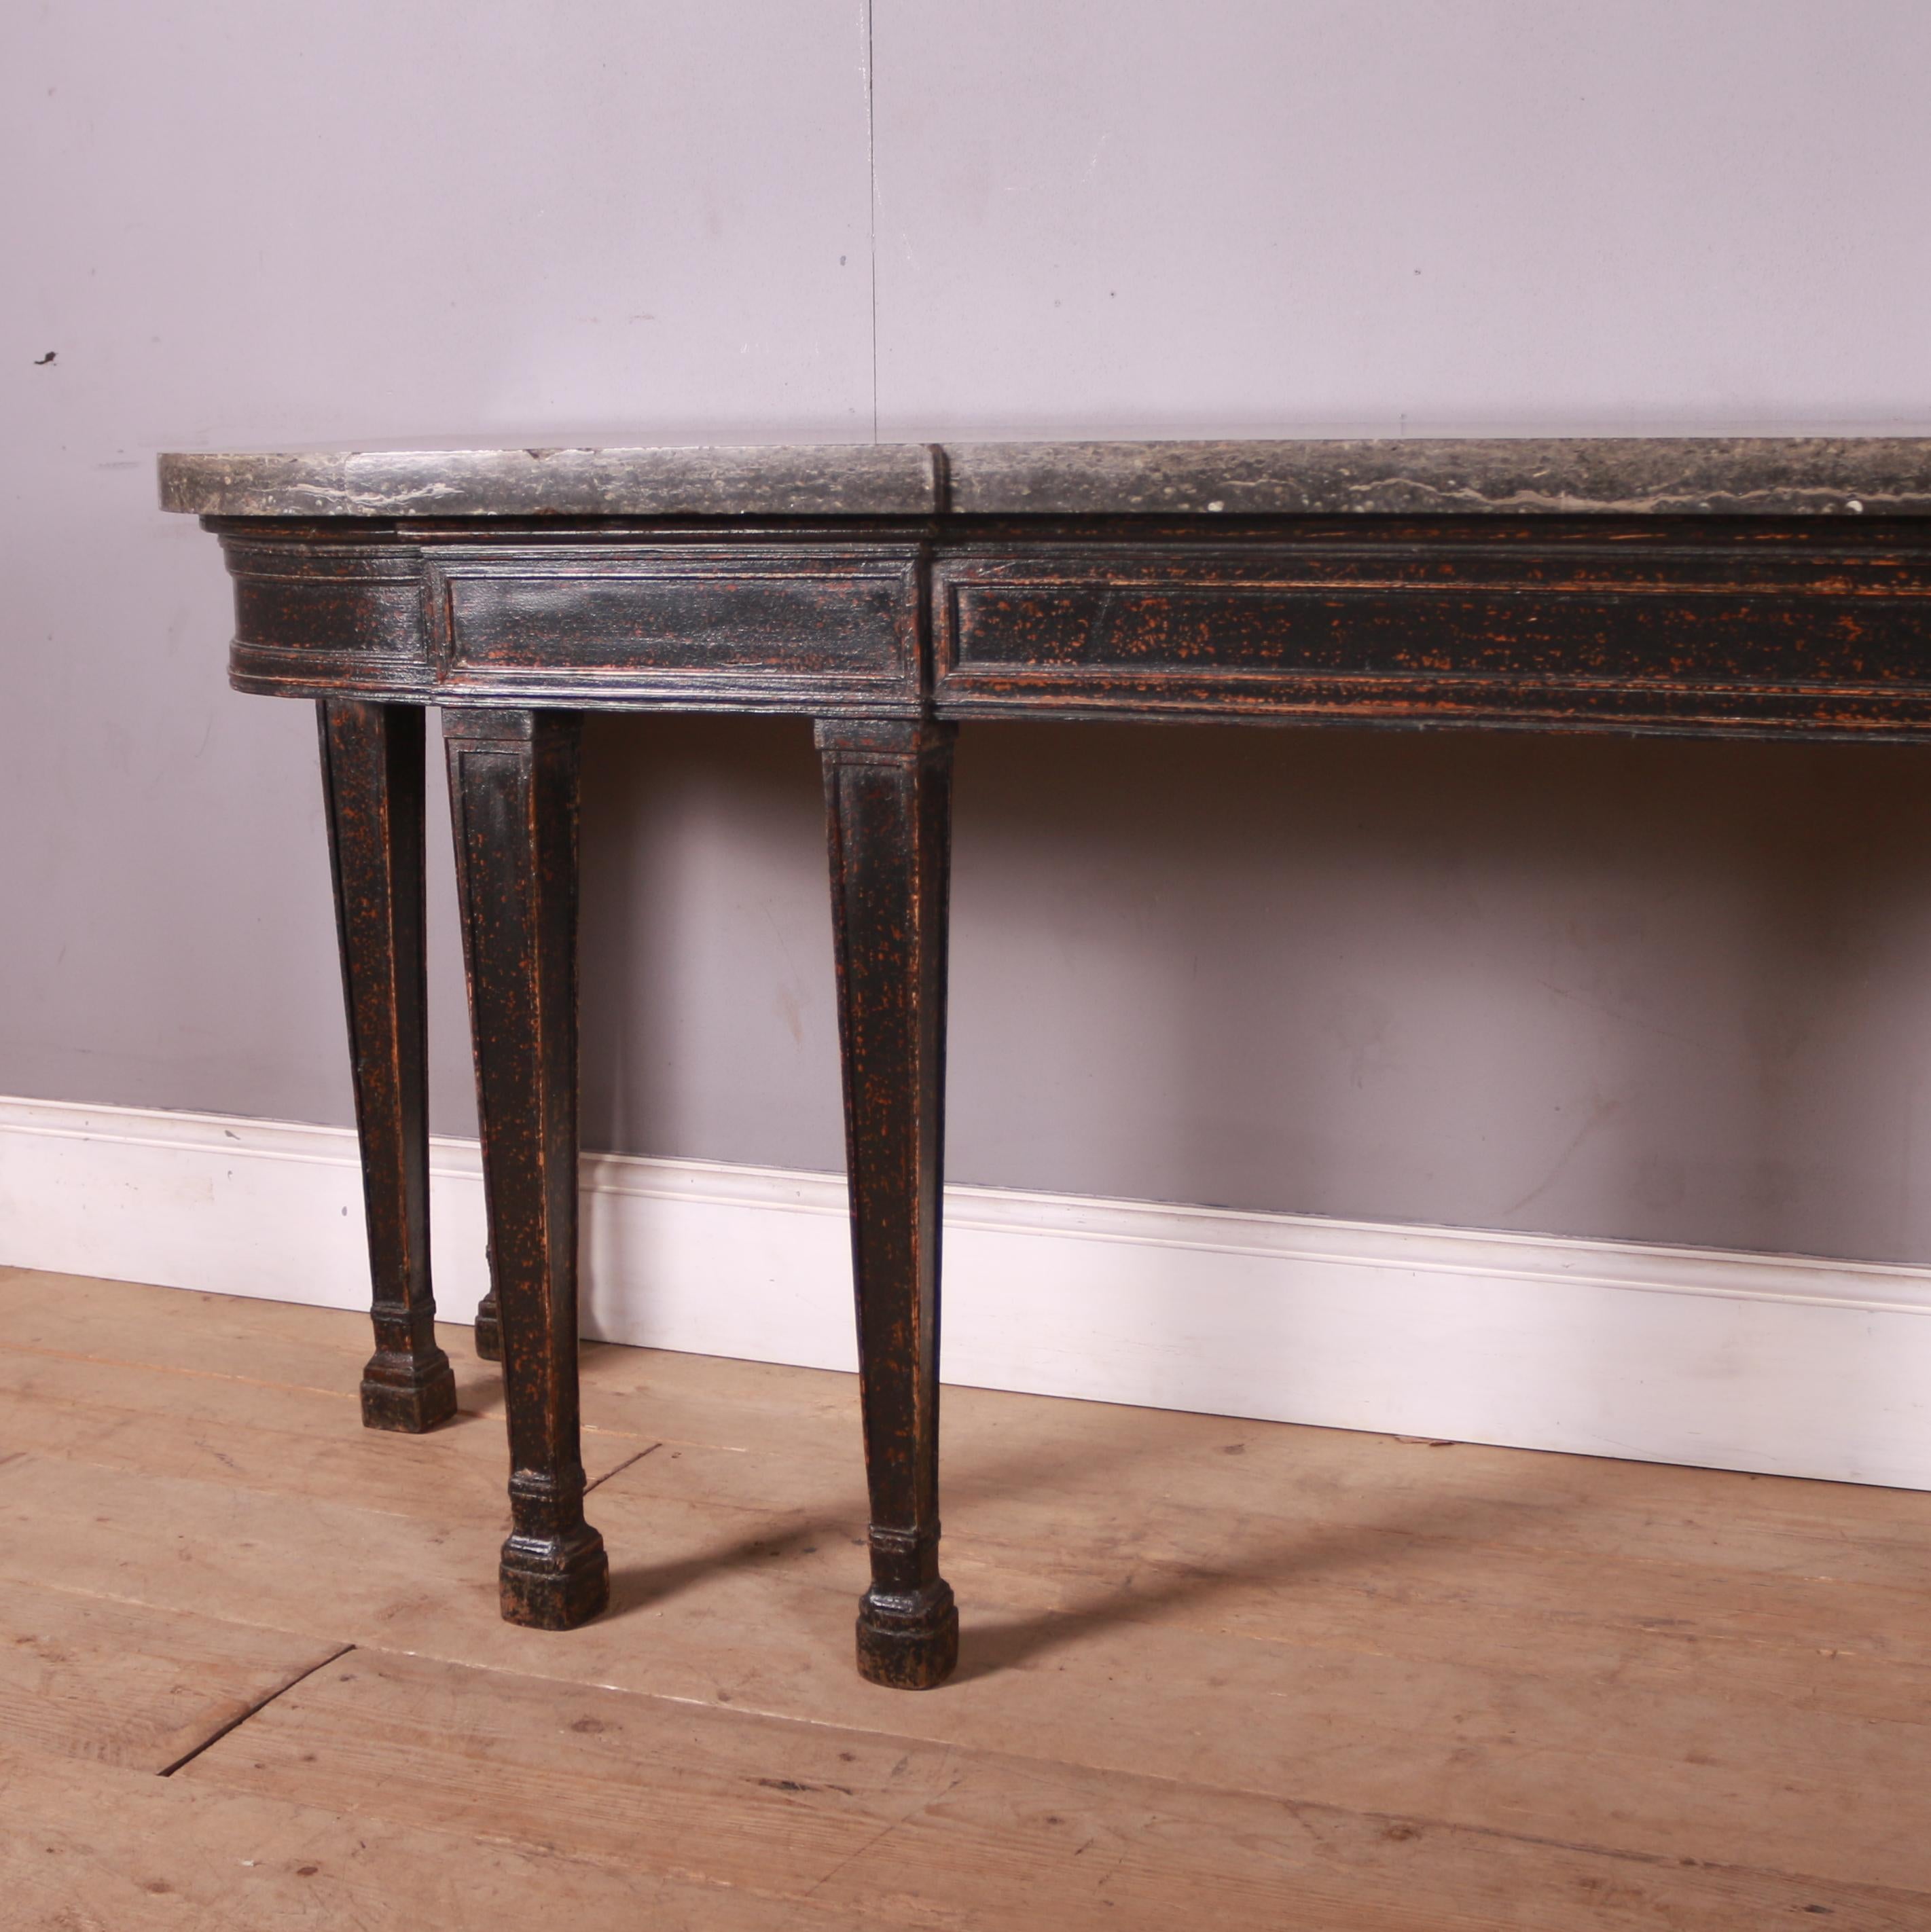 Wonderful early 19th C English painted pine console table with a thick polished stone top. 1820

5